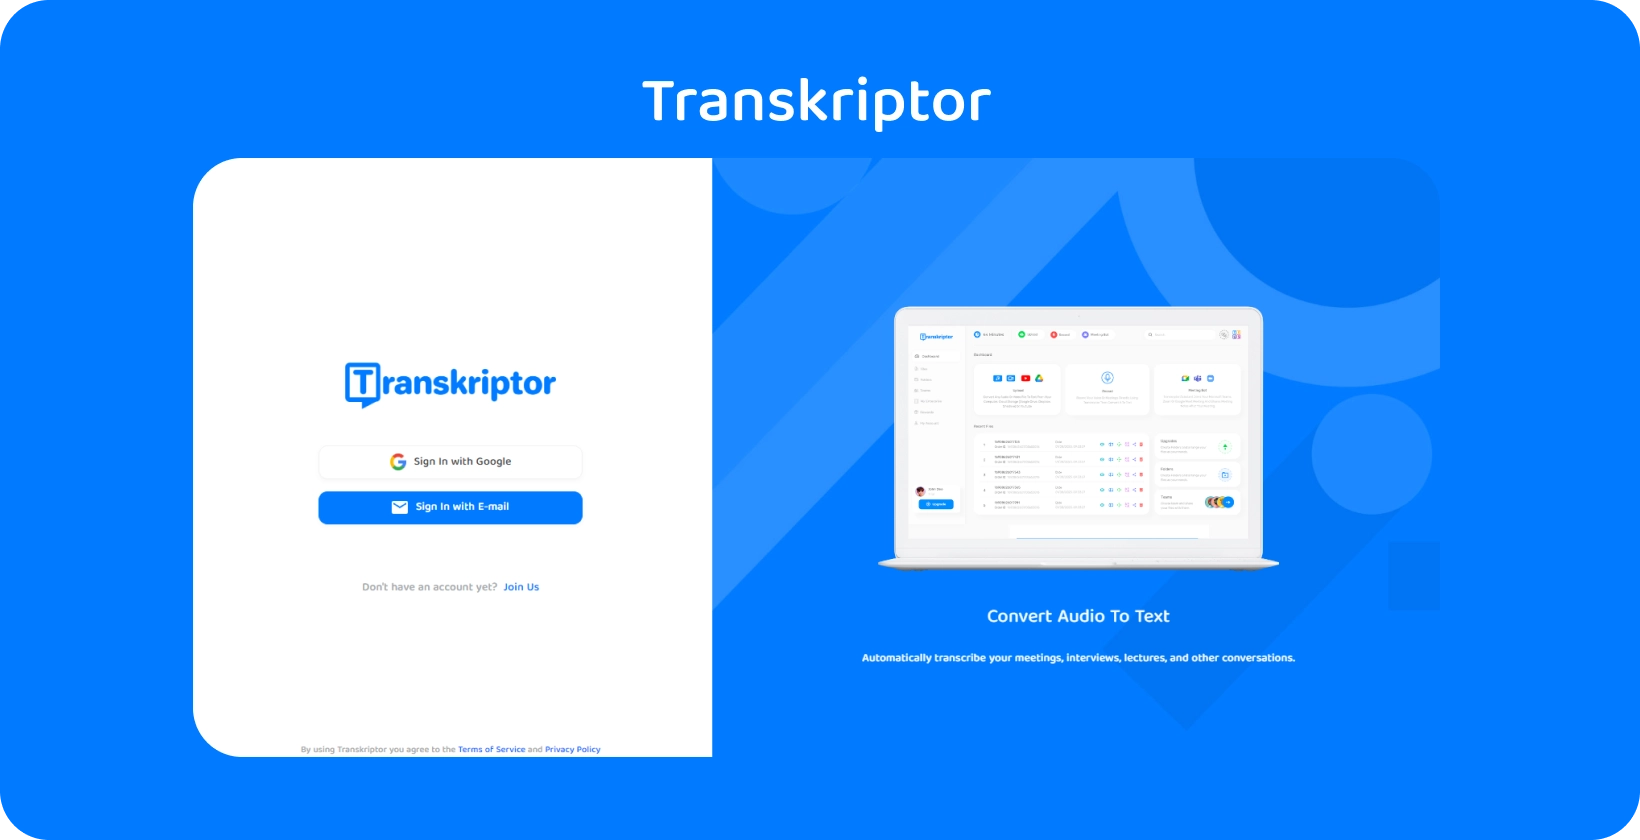 Transkriptor app interface showcasing easy audio to text transcription services for medical records insights.